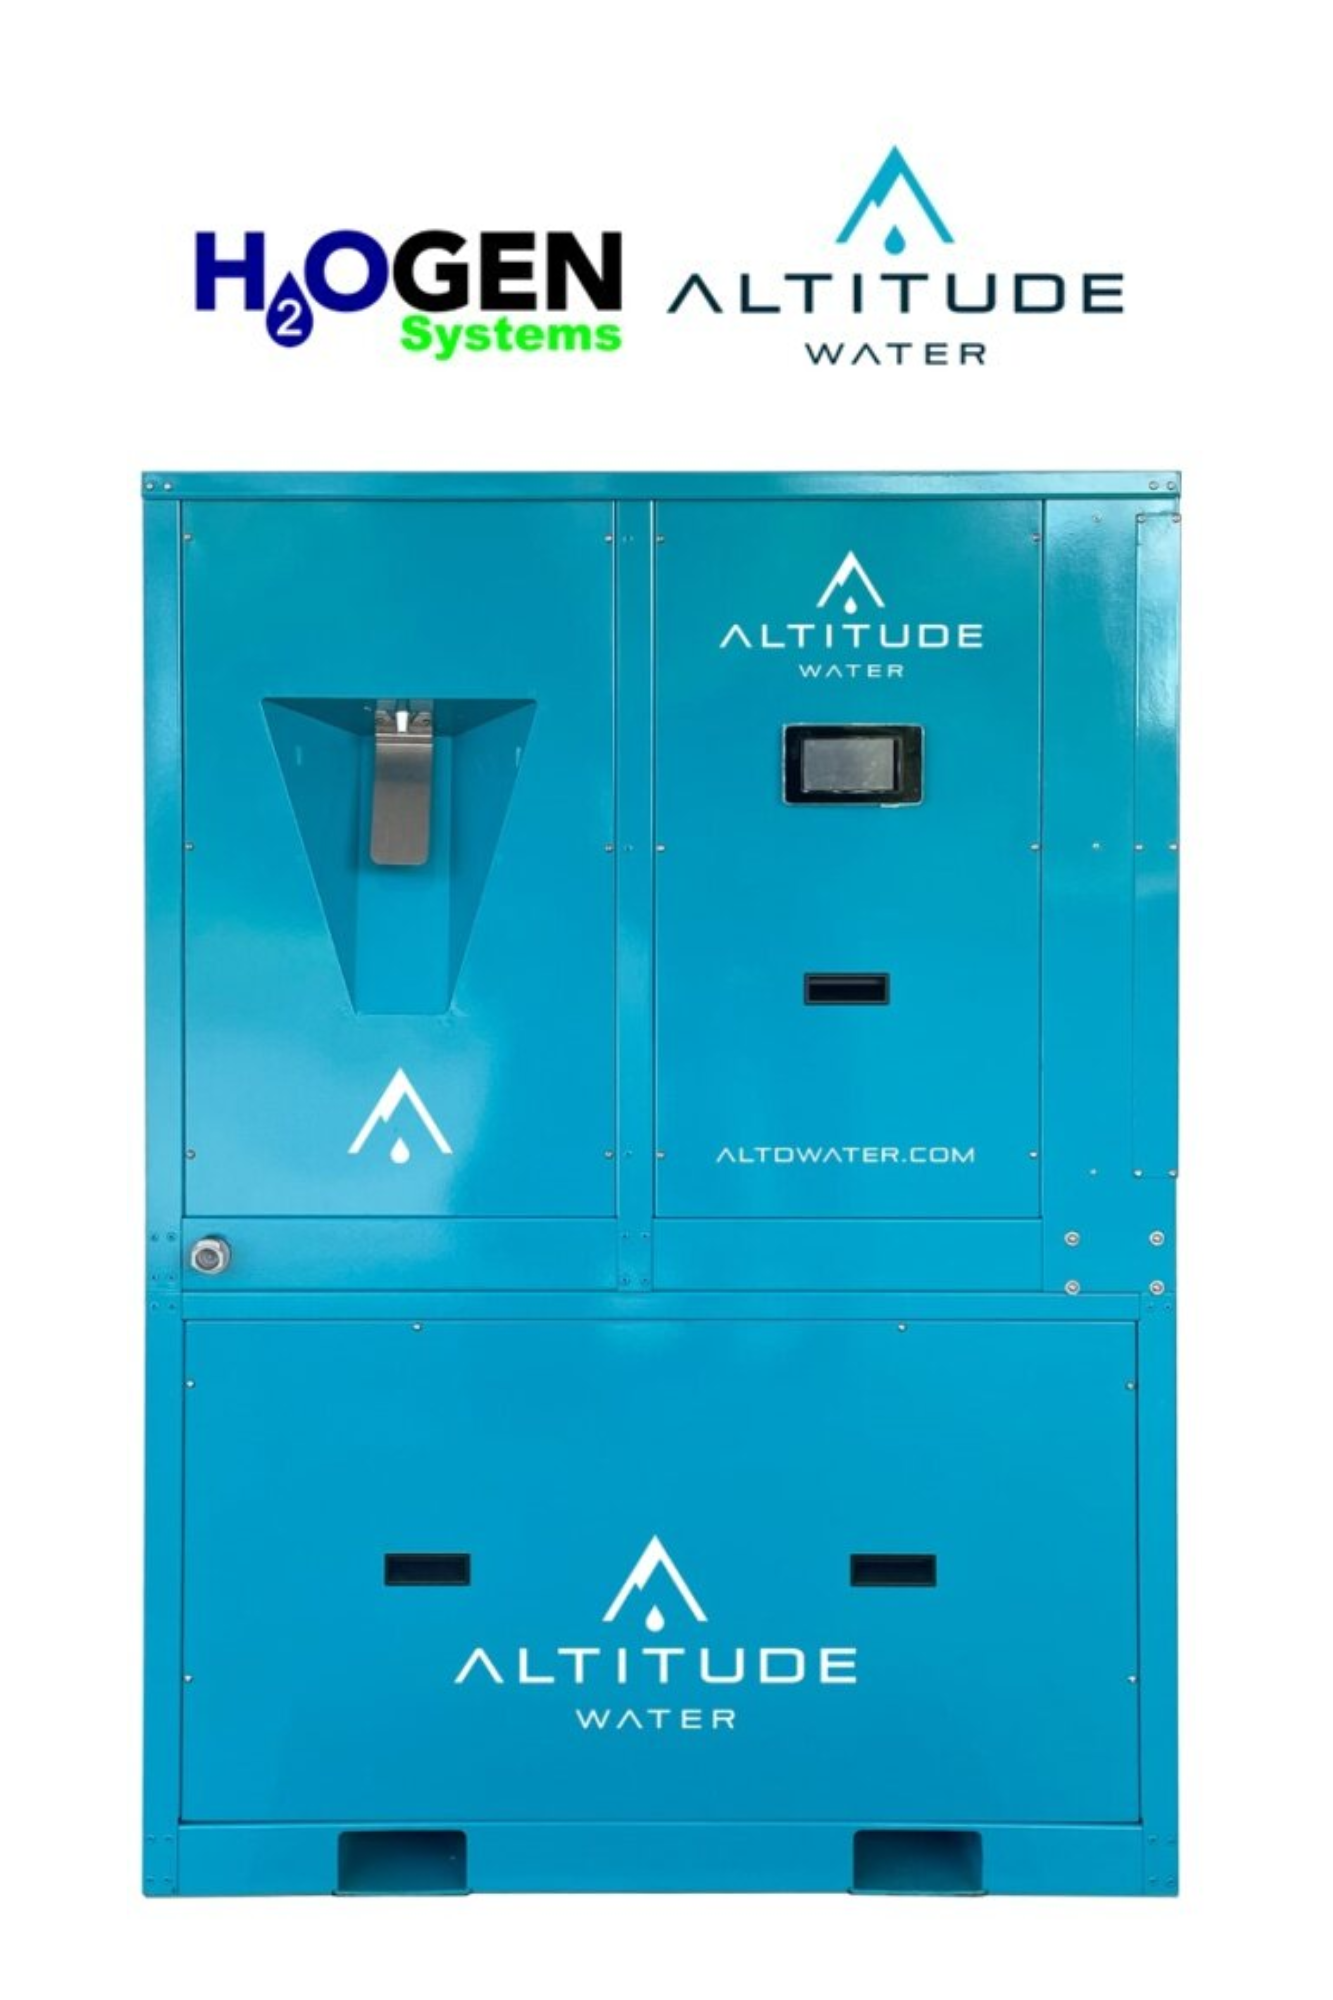 Hogen Systems and Altitude Water have joined forces in a strategic partnership to expand the accessibility of Atmospheric Water Generation (AWG)...